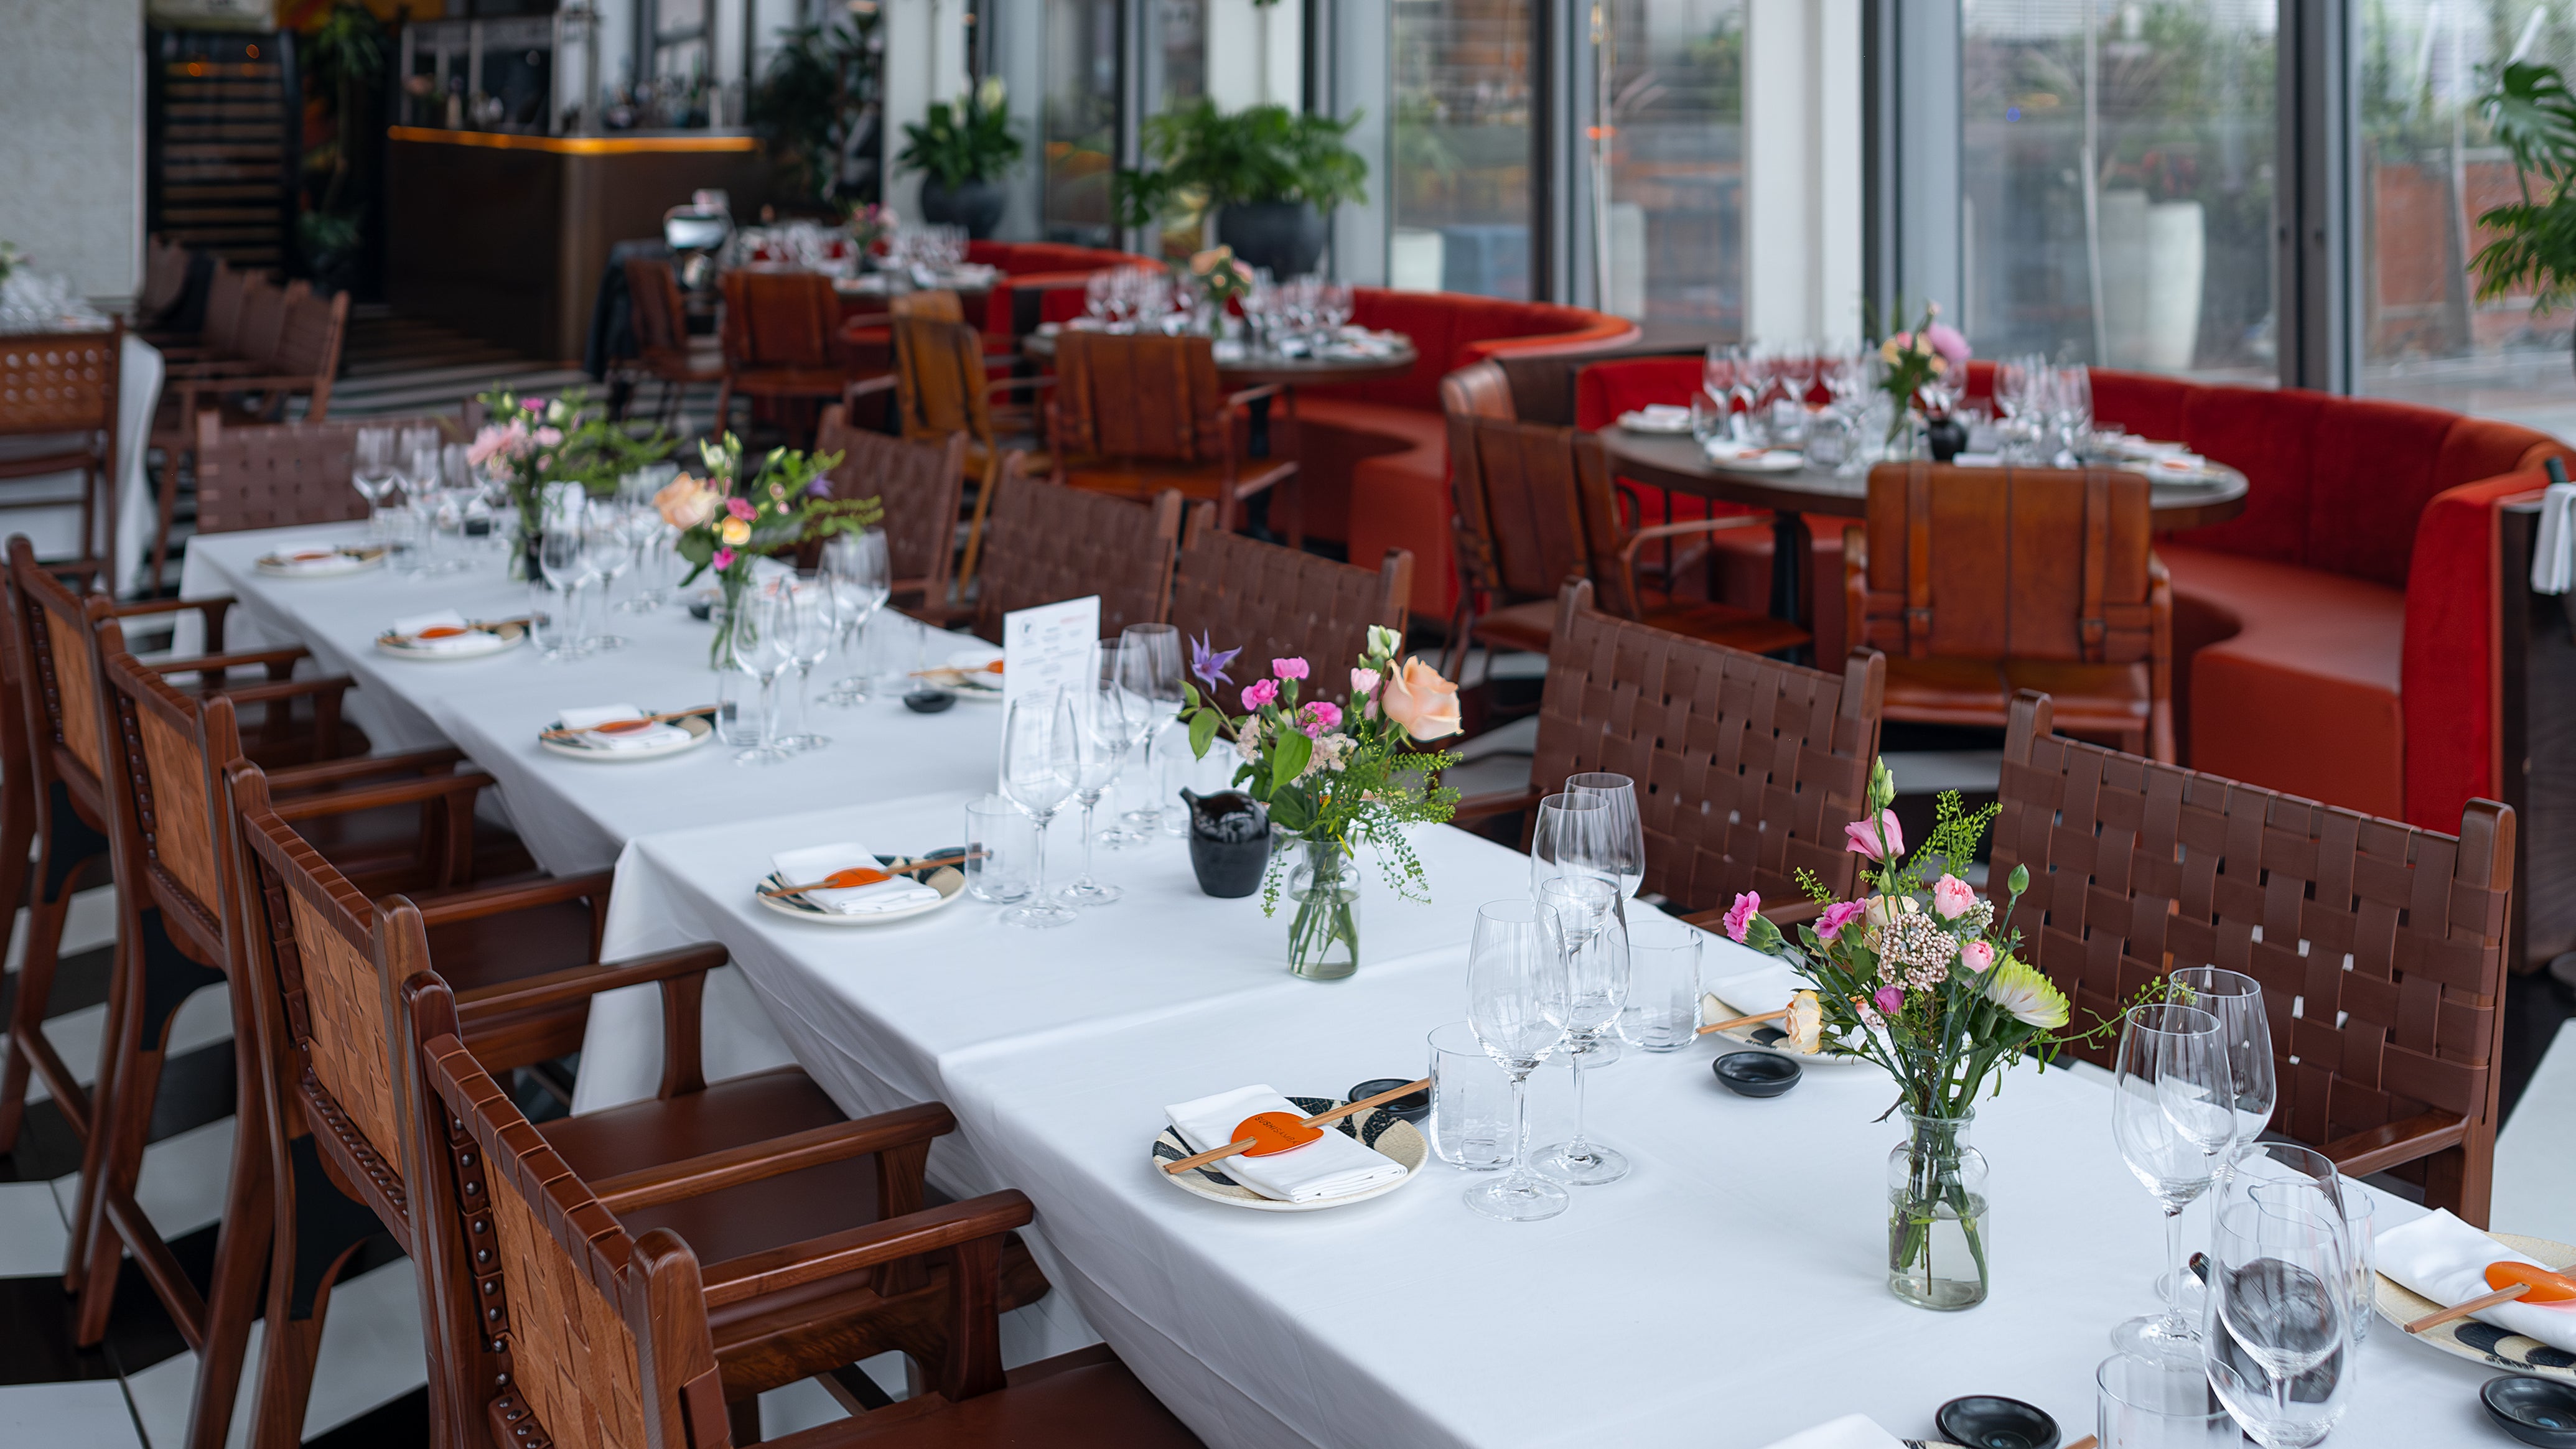 A long dining table at the Chanel event in SUSHISAMBA, adorned with bespoke floral arrangements designed and created by event florist Amaranté London. These luxury bouquets include a mix of pink and cream blooms, perfectly complementing the luxurious setting.